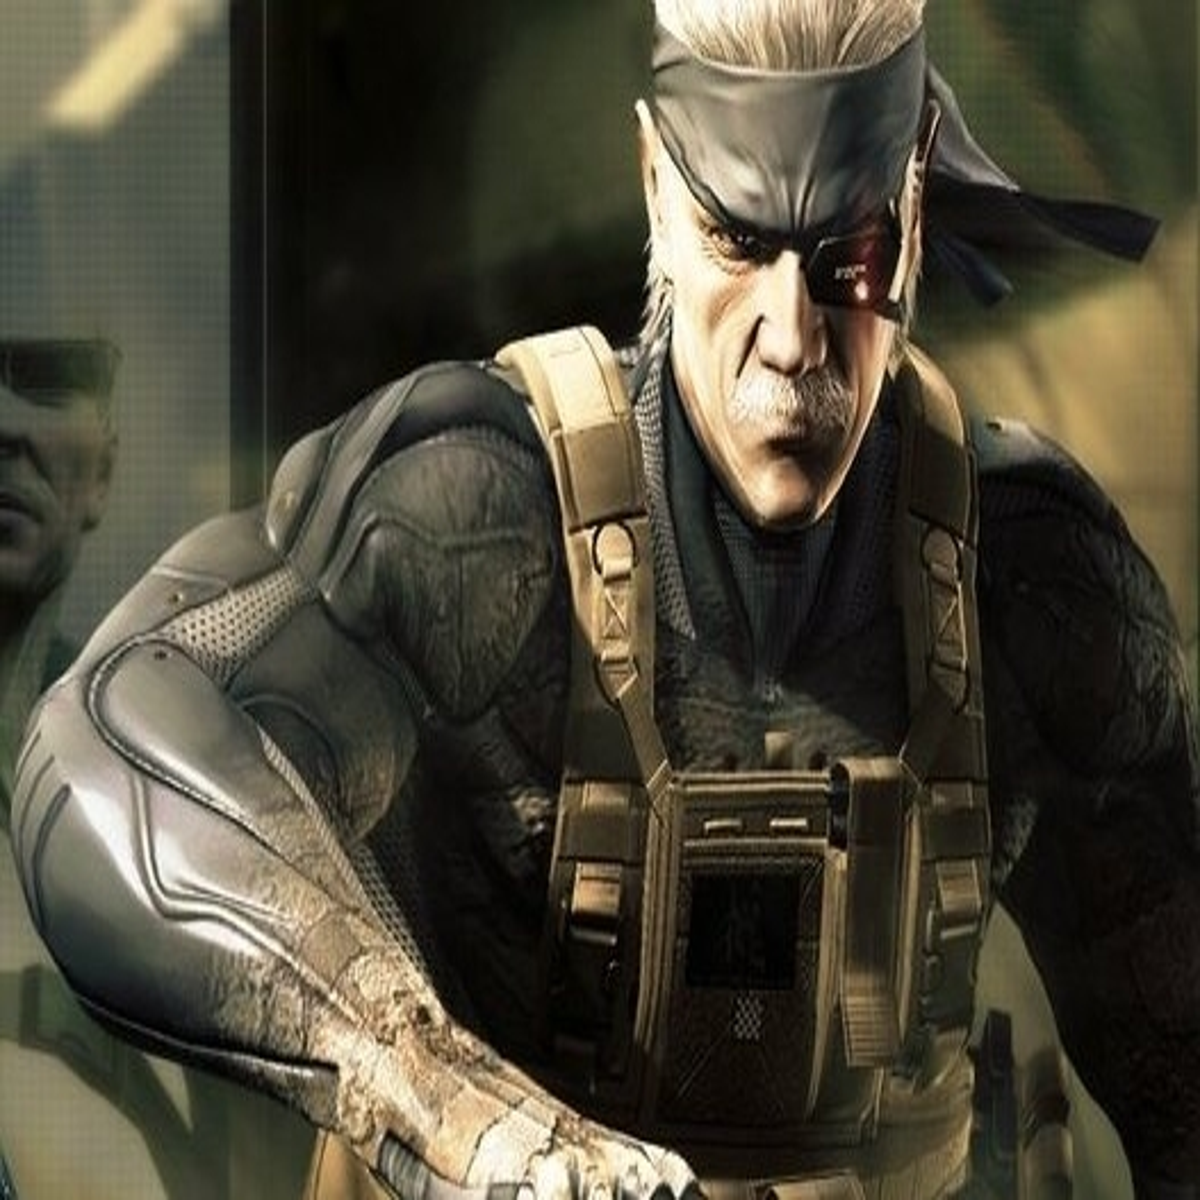 How long is Metal Gear Solid 4: Guns of the Patriots?